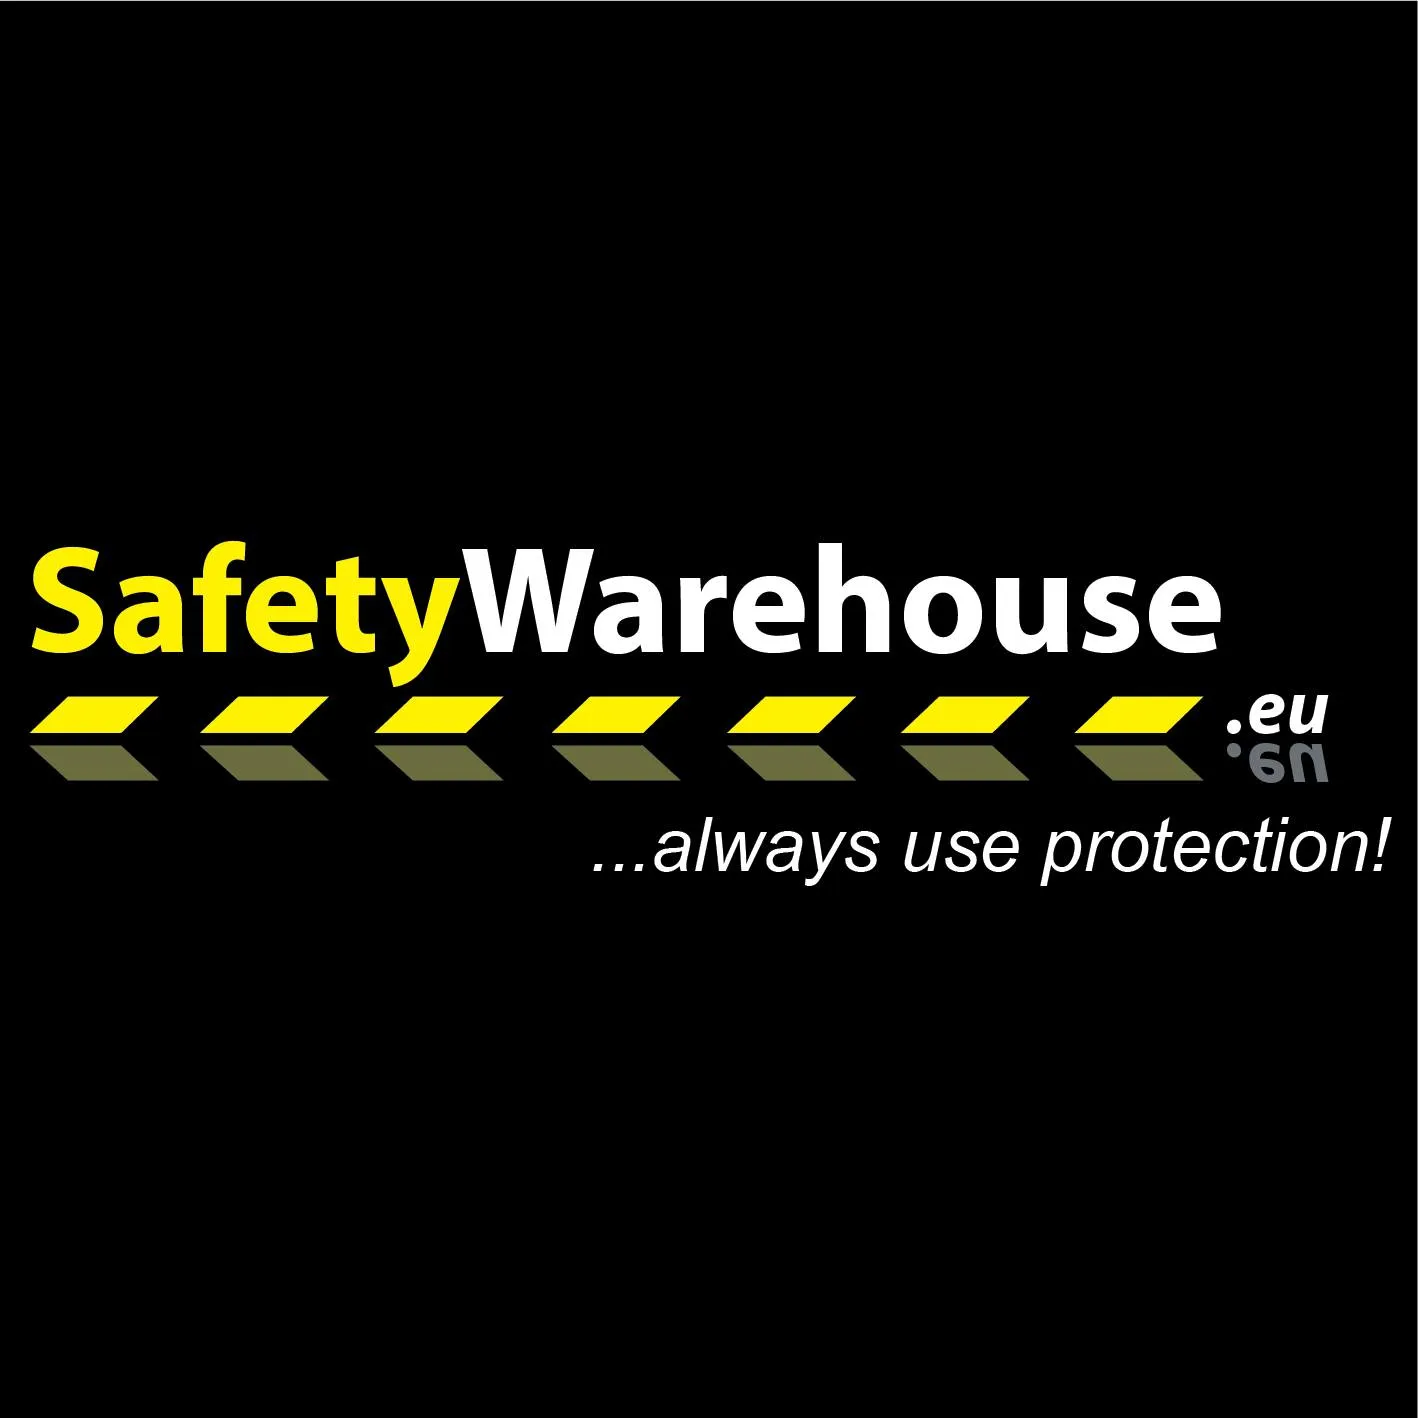 Get Save Up To £7 Saving With Safety Warehouse Coupns